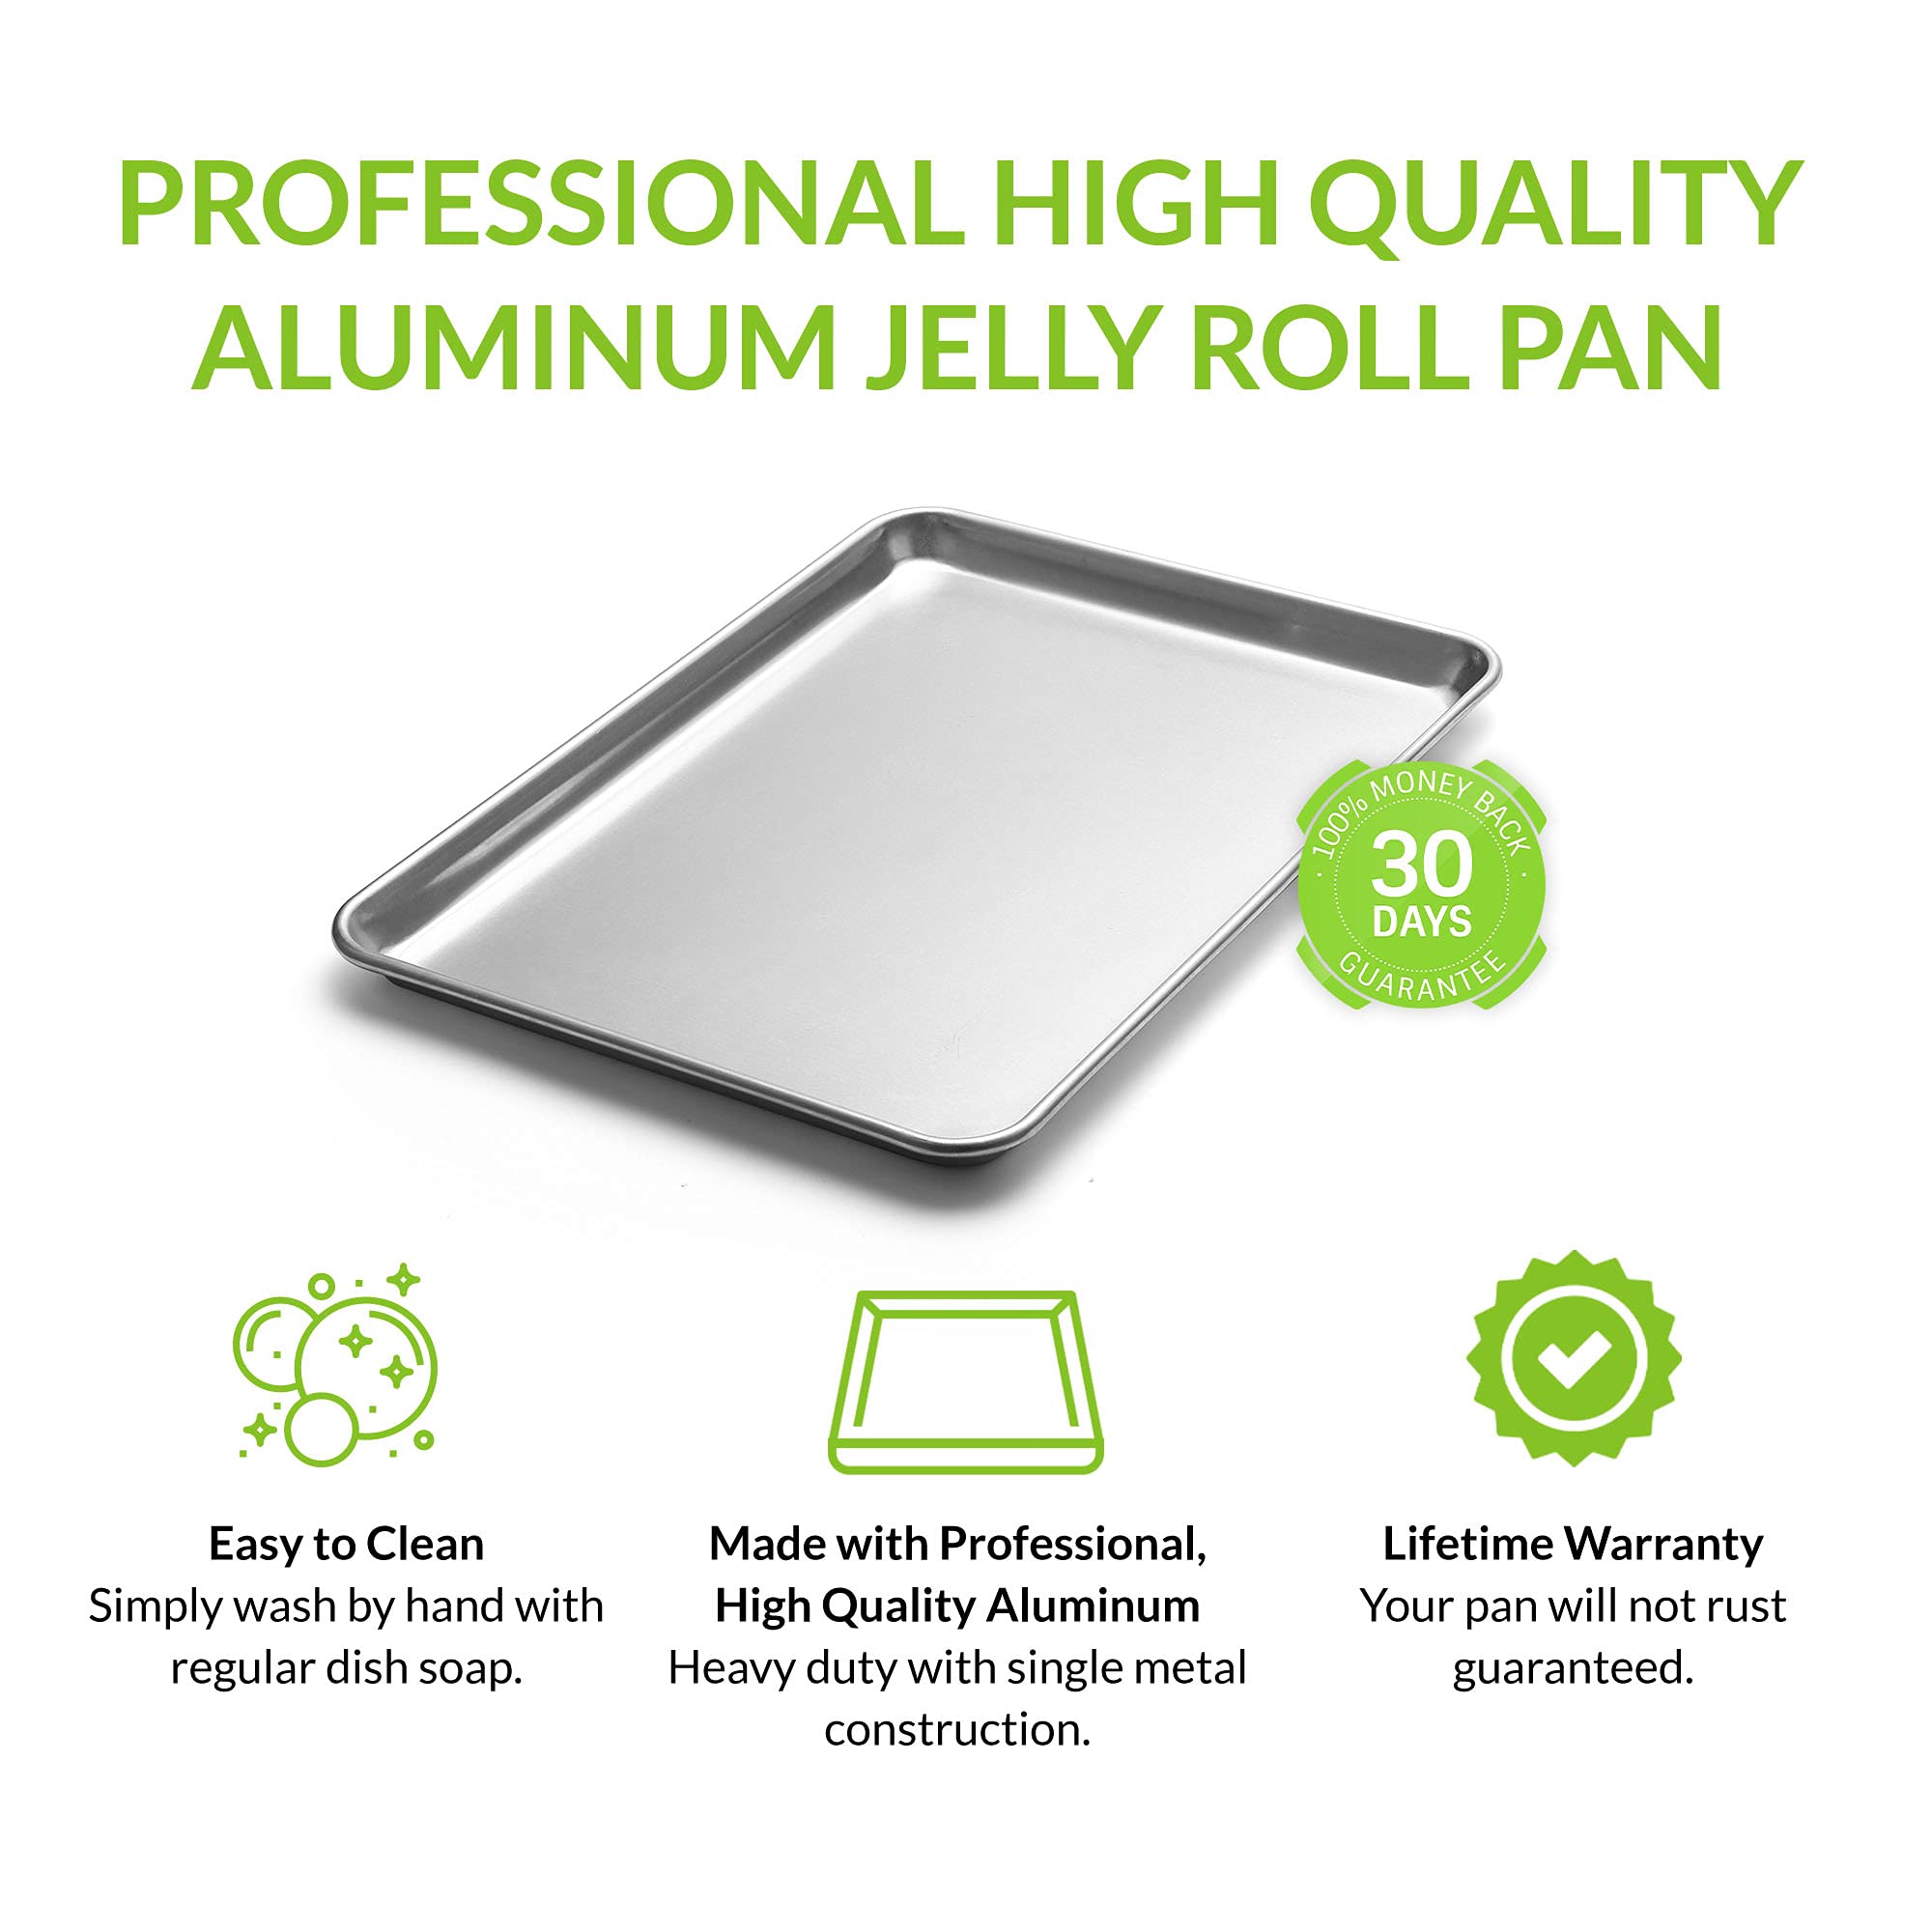 Spring Chef Jelly Roll Pan - 11.2 x 15.7-inch Durable Aluminum Baking Pan - Non-Rust Baking Tray for Cookies, Meat, Vegetables, Pastries - Distributes Heat Evenly - Easy To Clean Cookie Sheet Pan